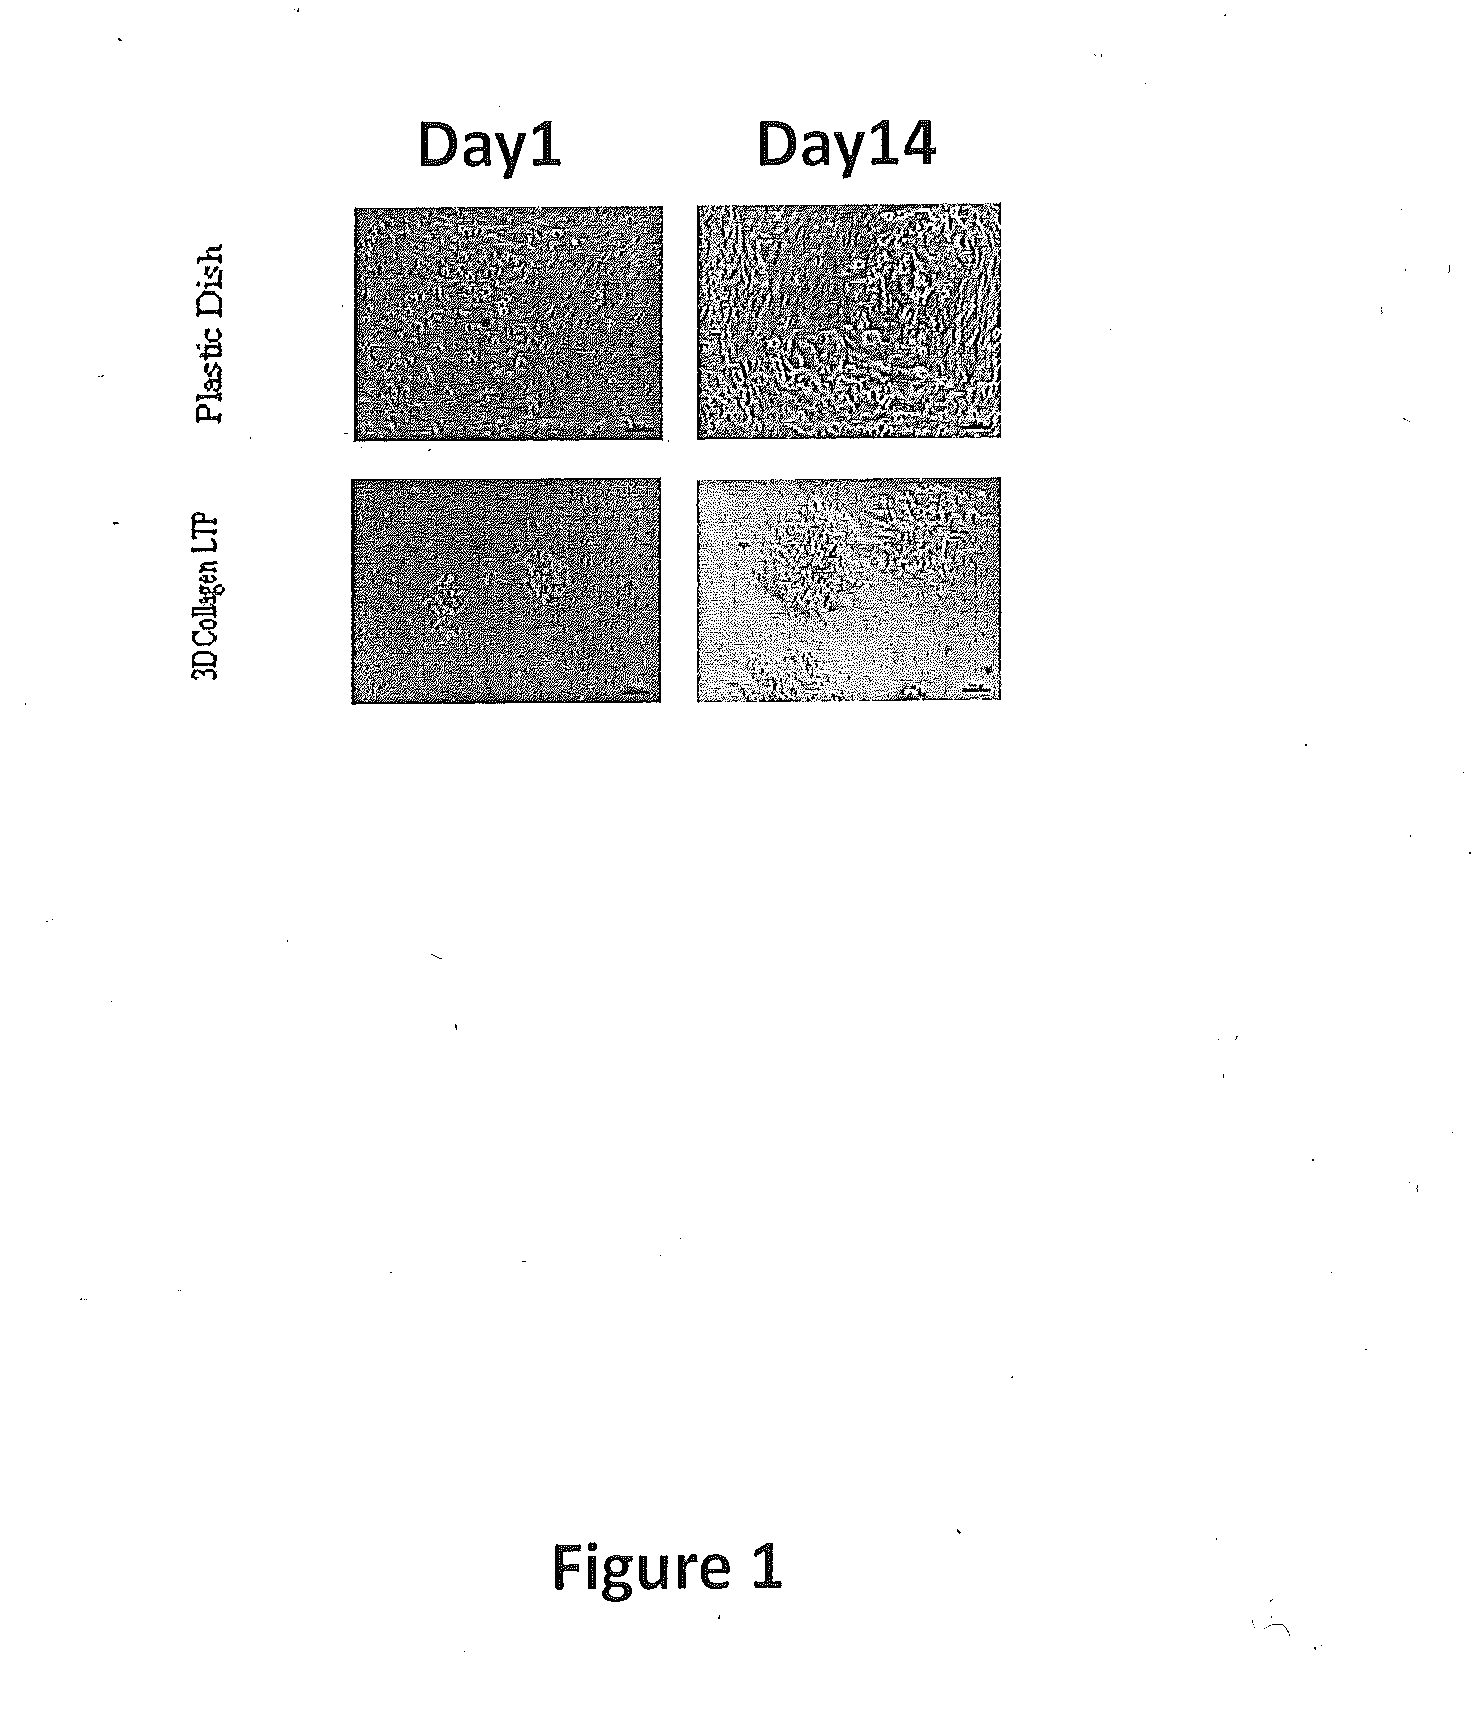 Tissue-Specific Extracellular Matrix With or Without Tissue Protein Components for Cell Culture